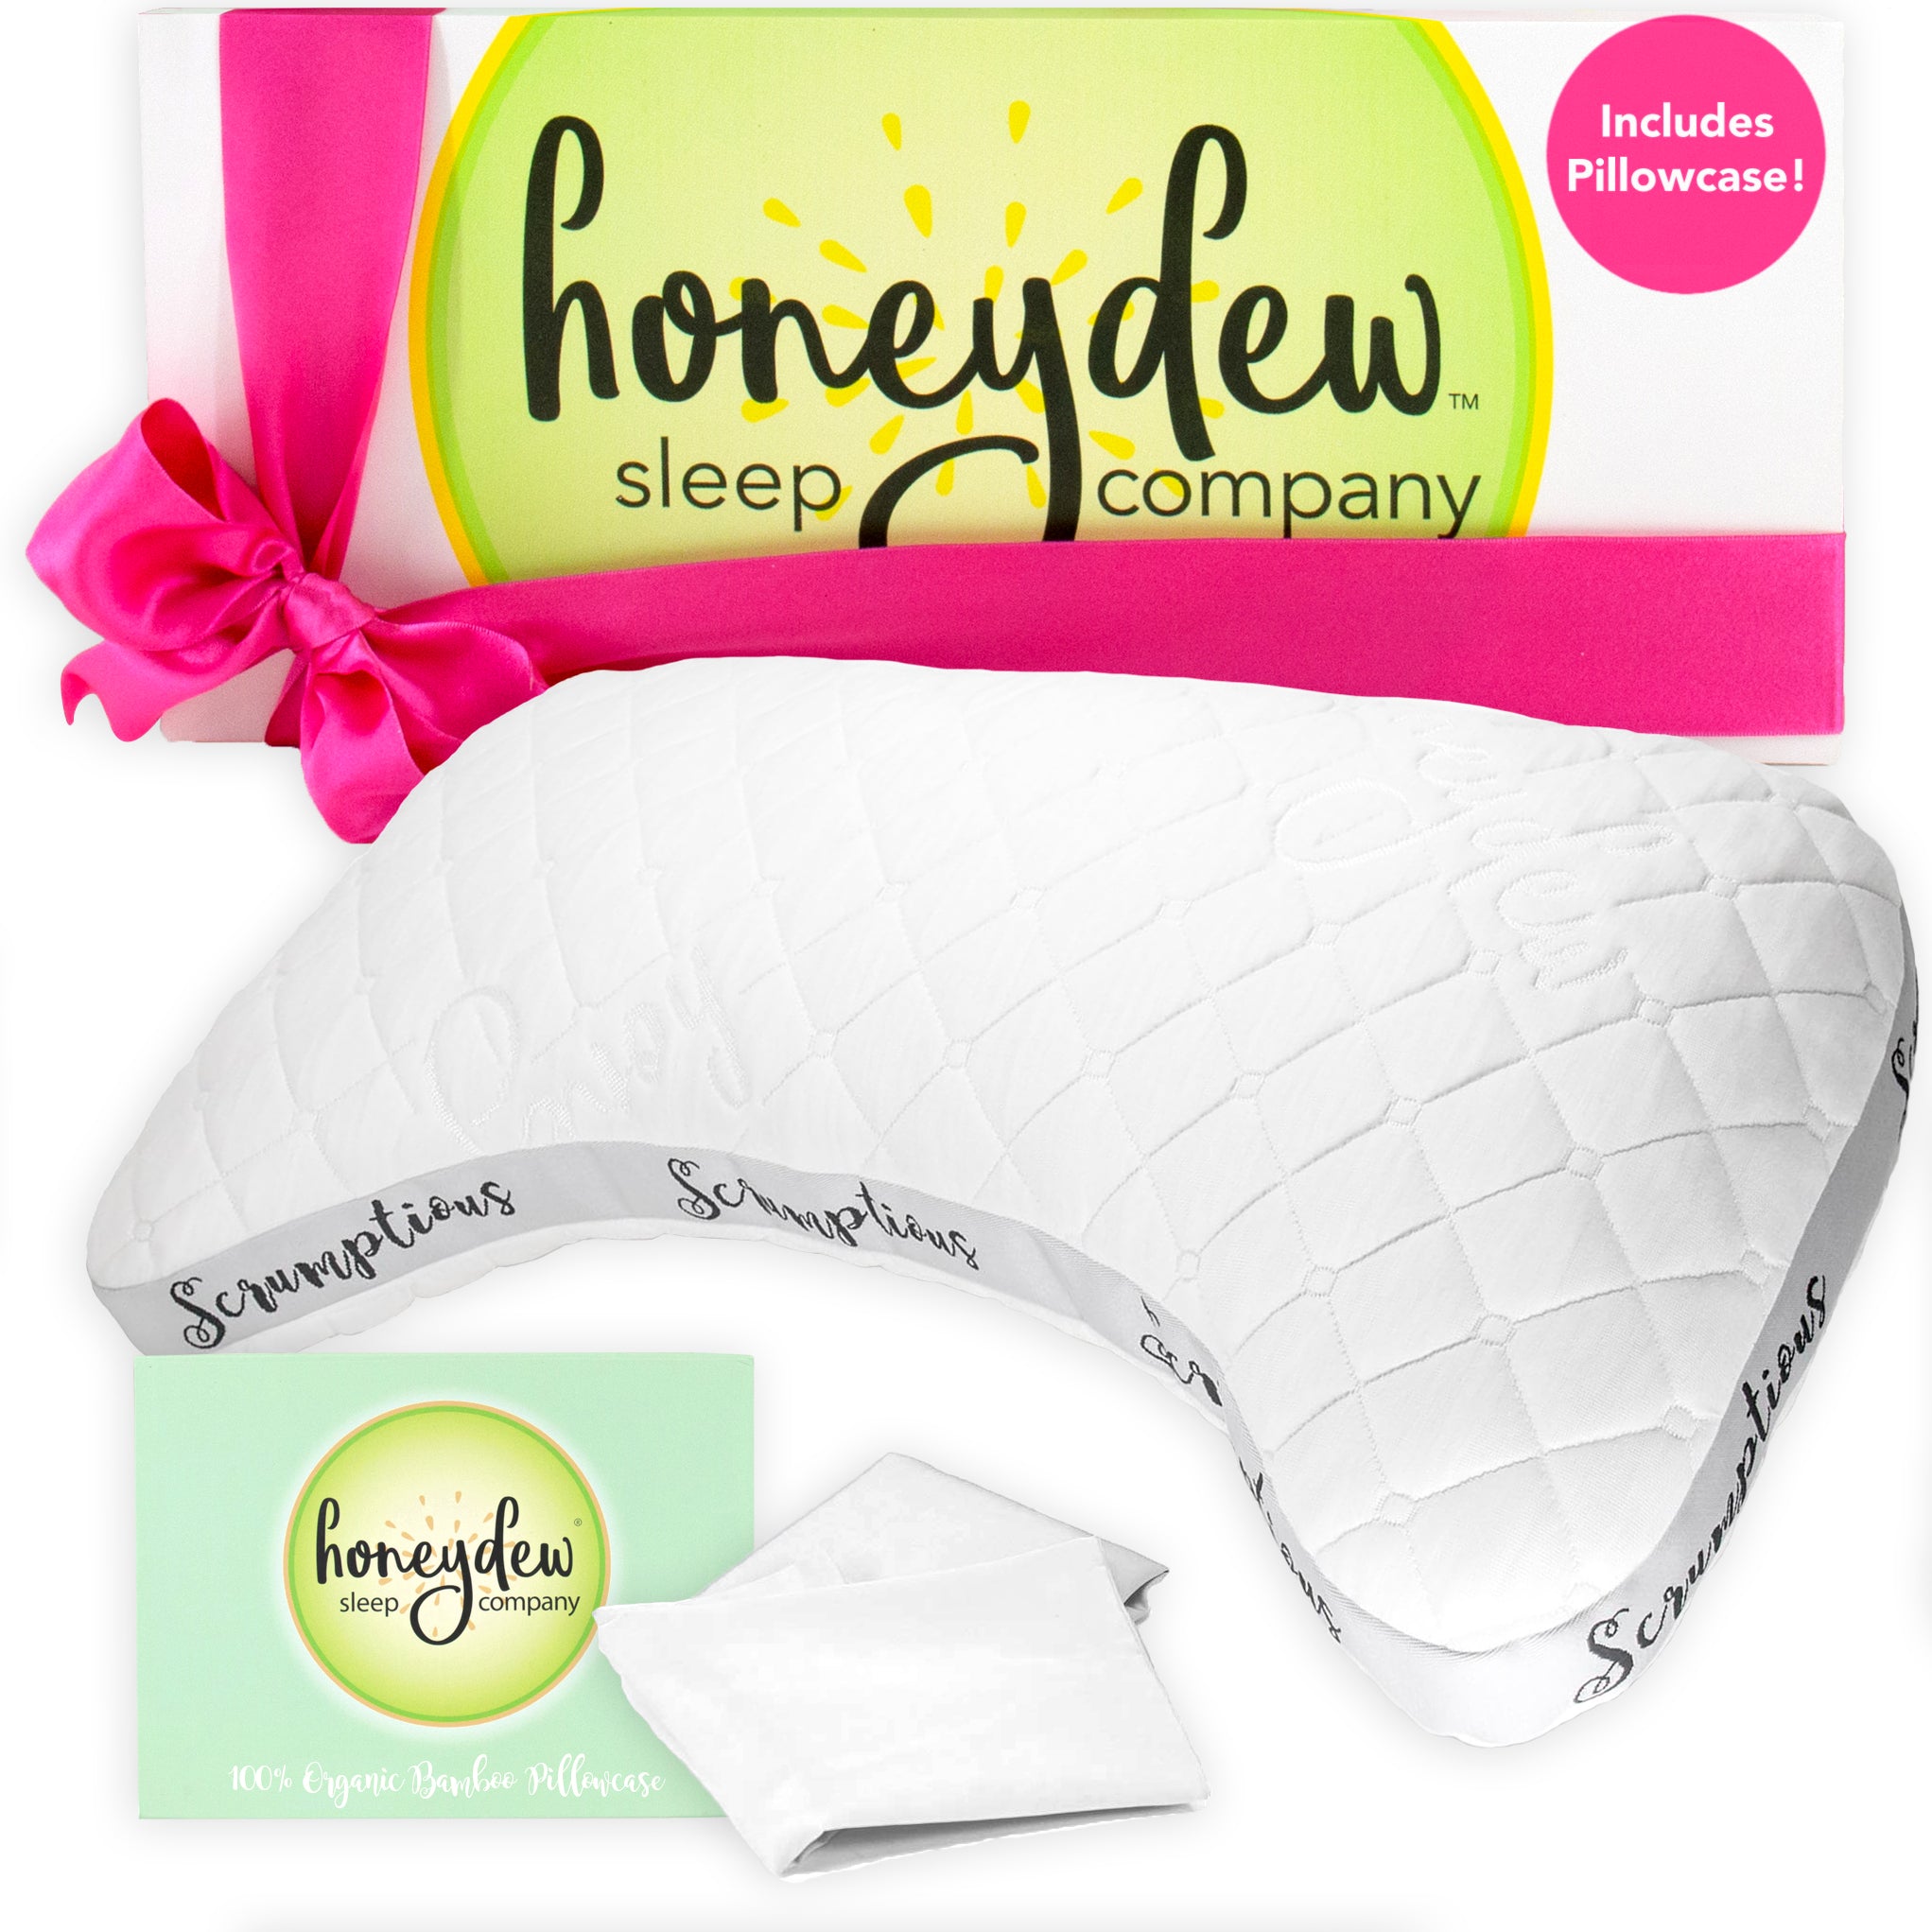 Body Pillow Covers made from 100% GOTS-certified organic Cotton & Linen -  Cuddler Cover